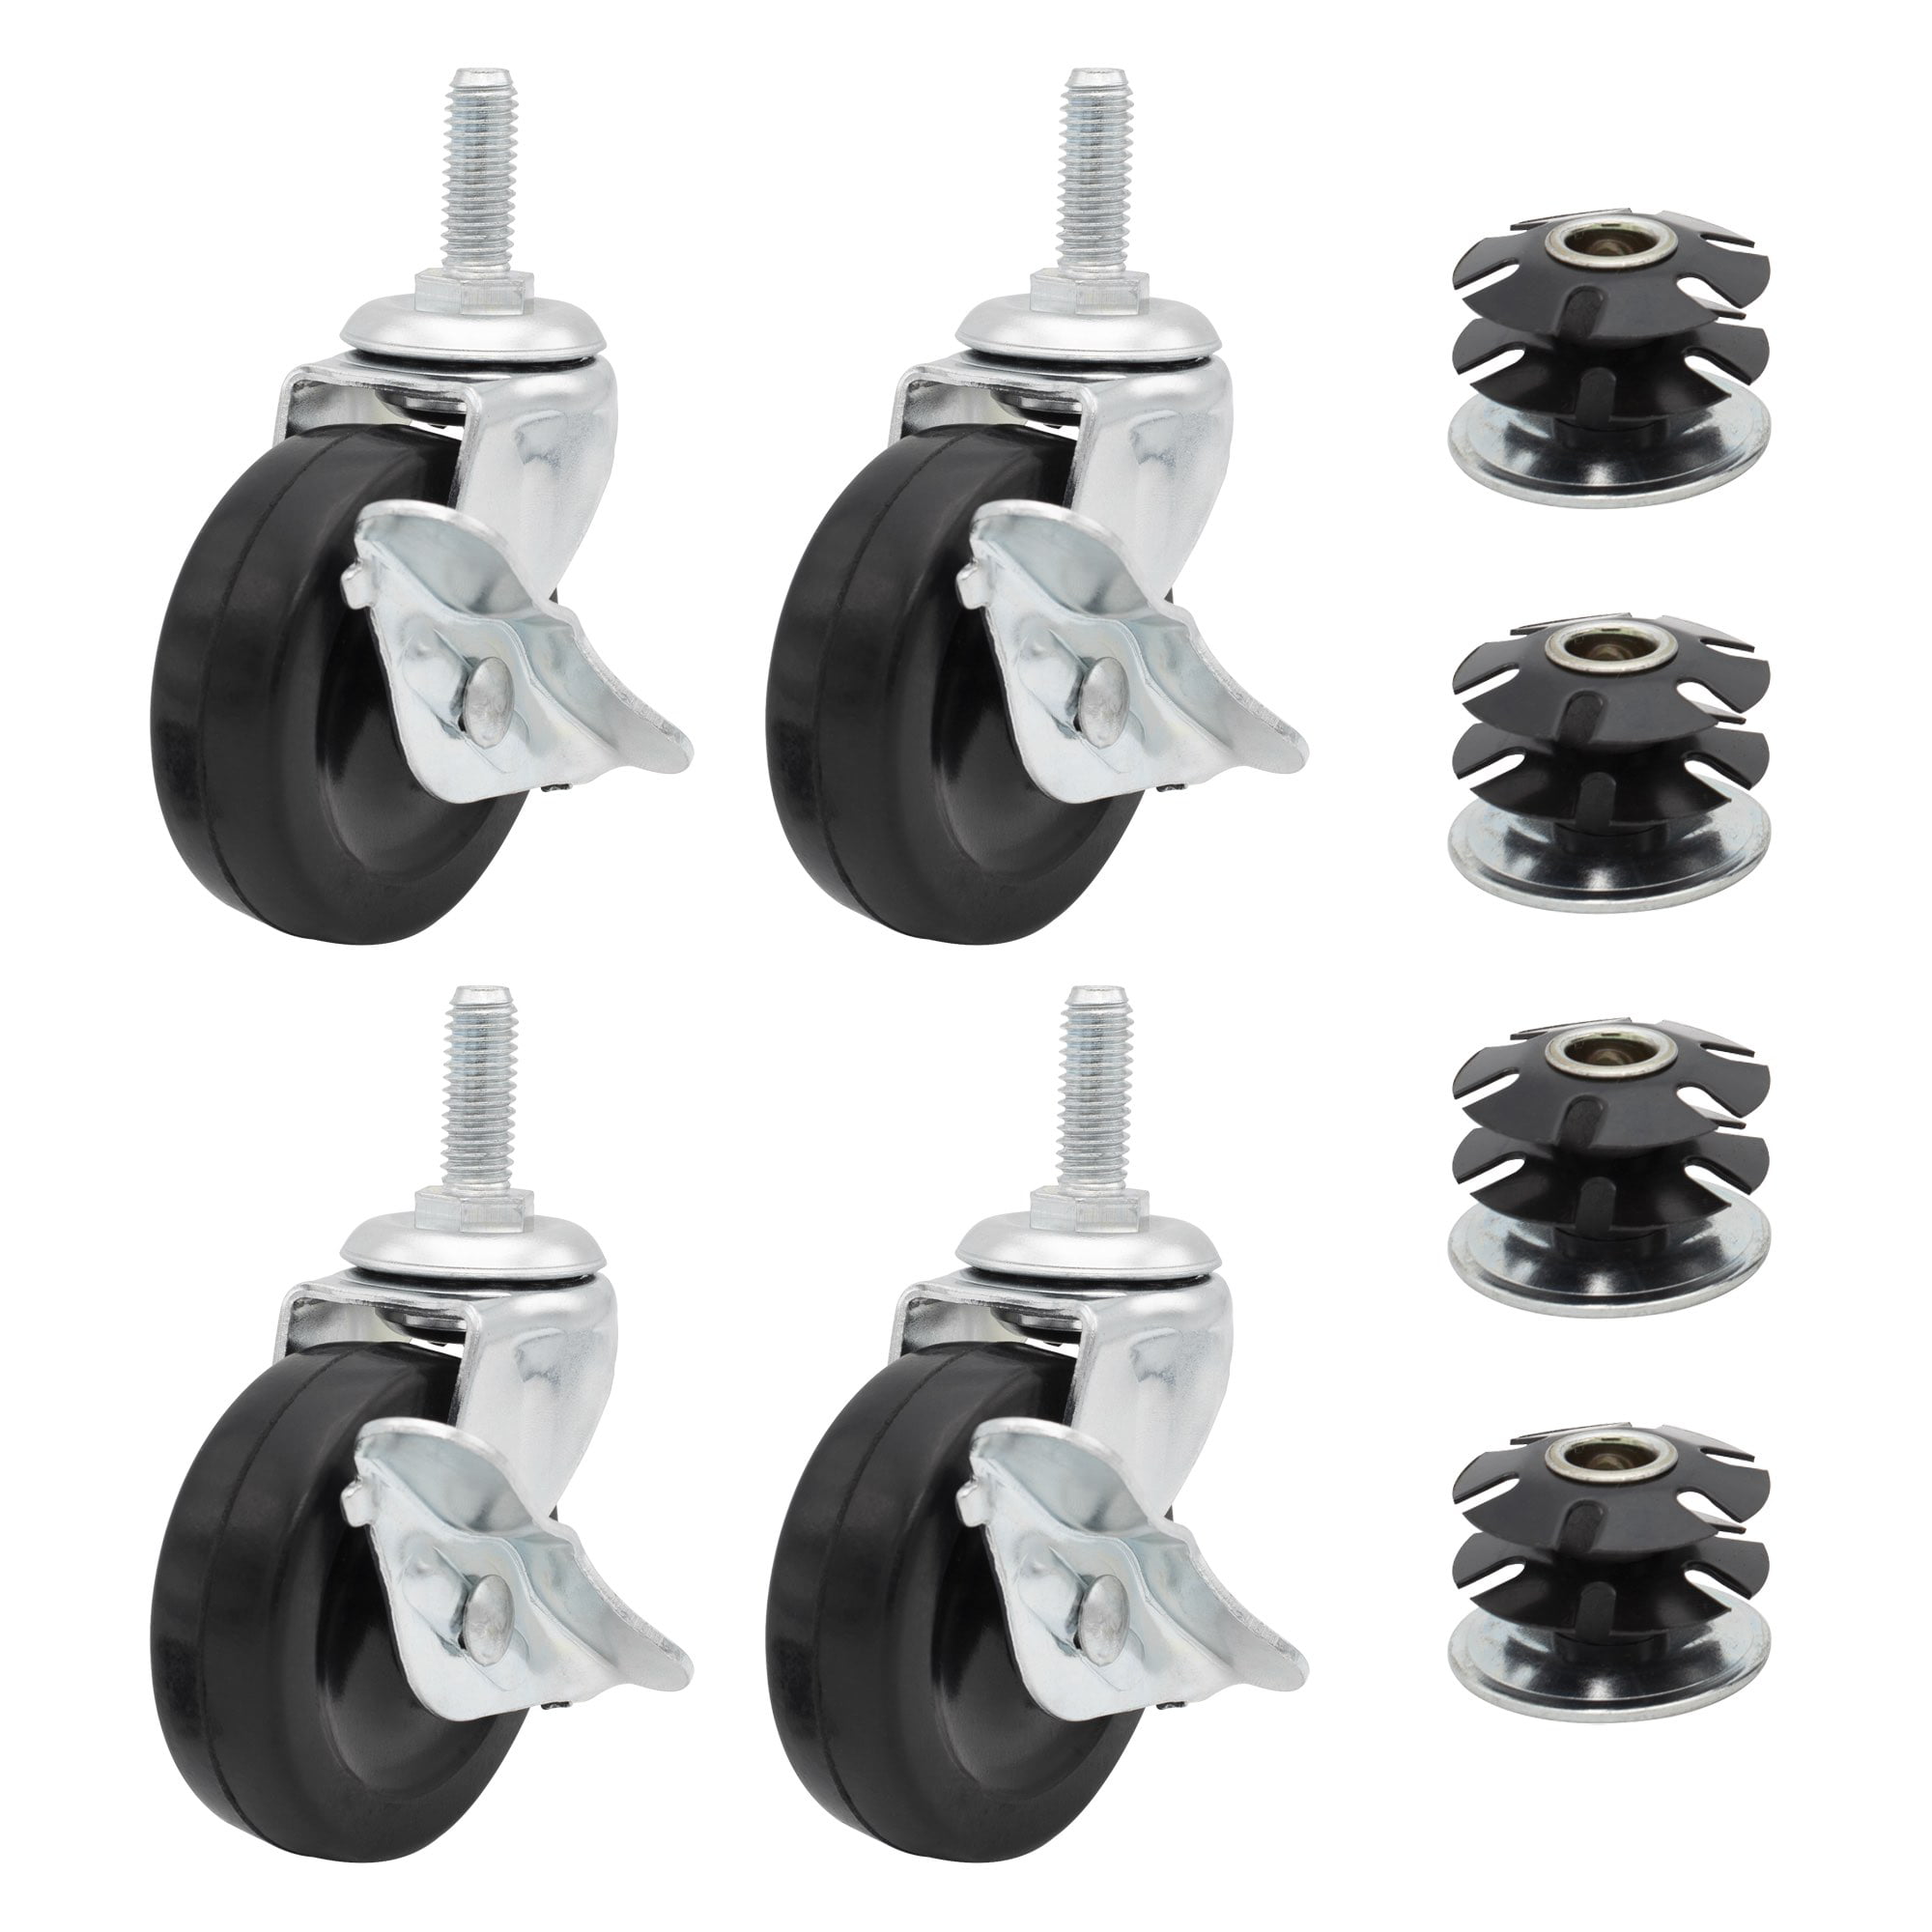 Office Chair Replacement 5-2 1/4" Swivel Wheels Caster with 3/8" Stem Fit lot 